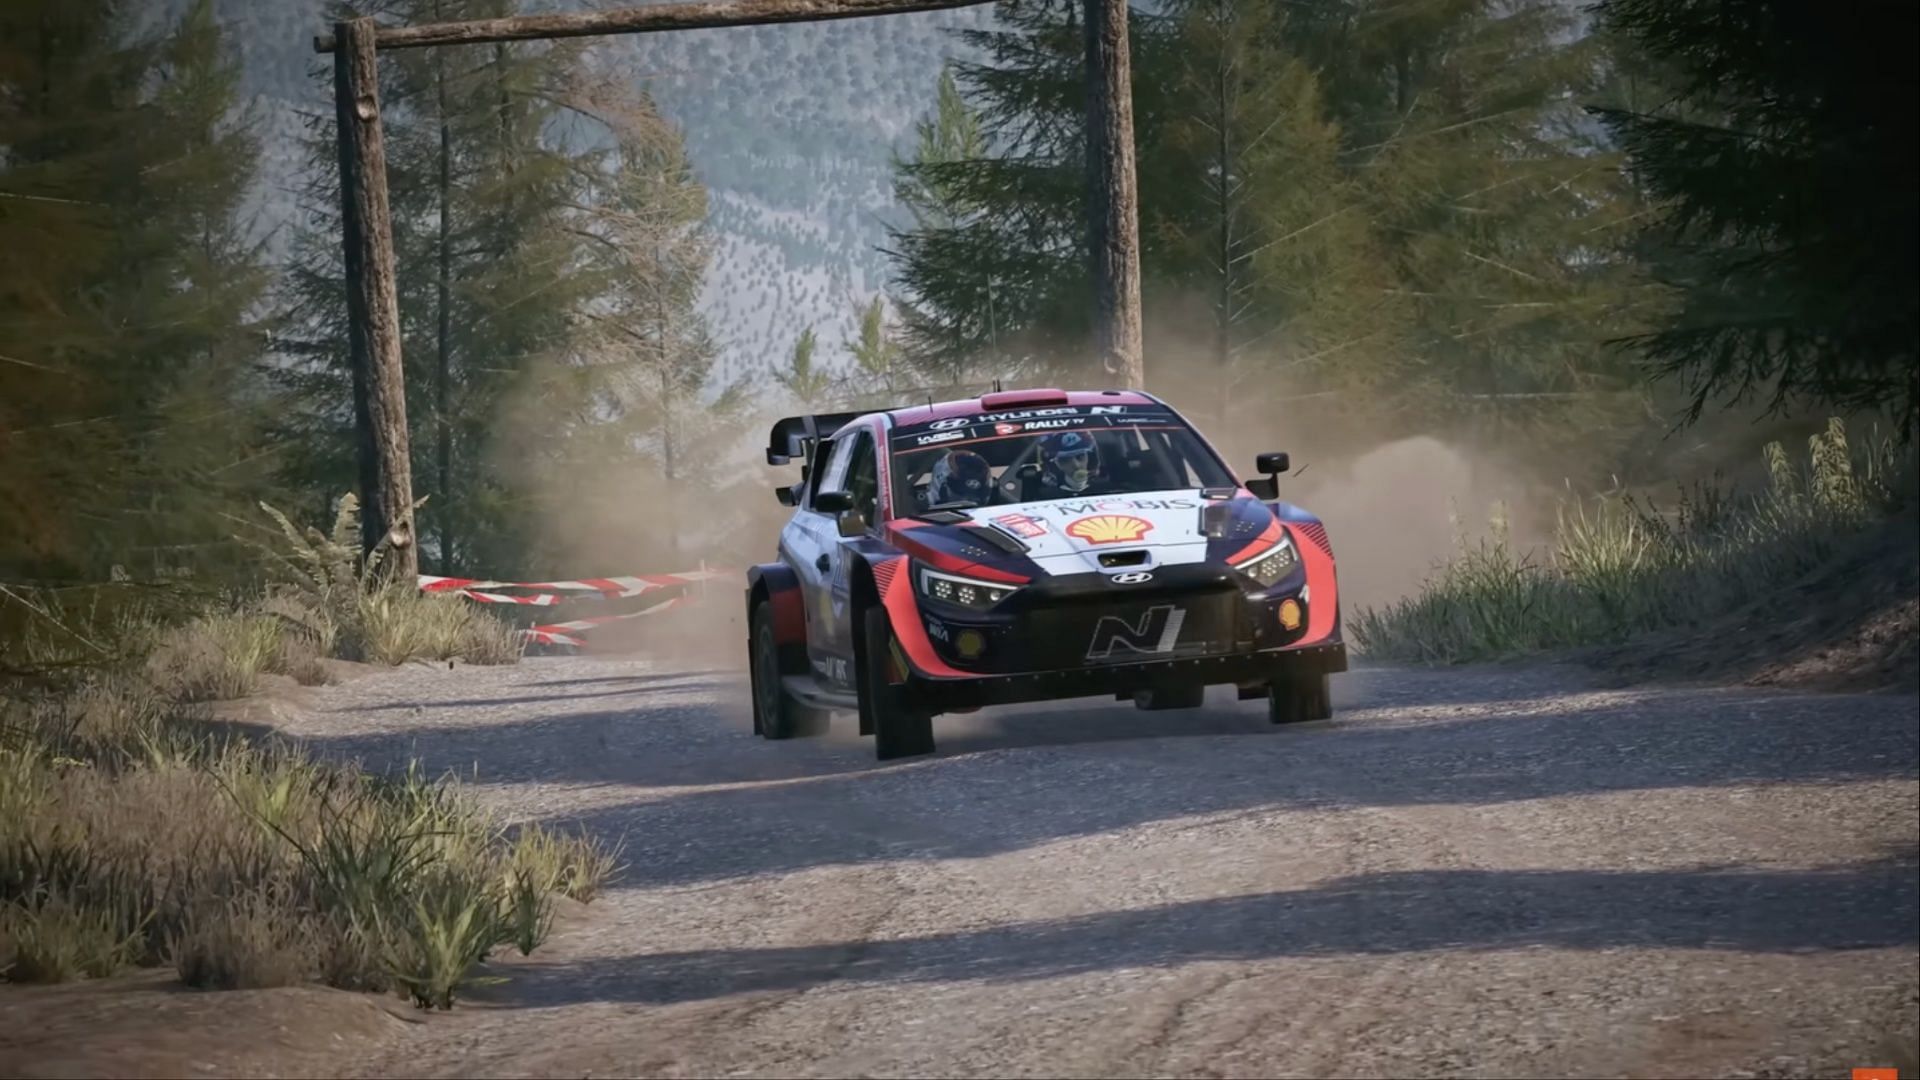 How to get quicker at sim rally driving by an esports professional